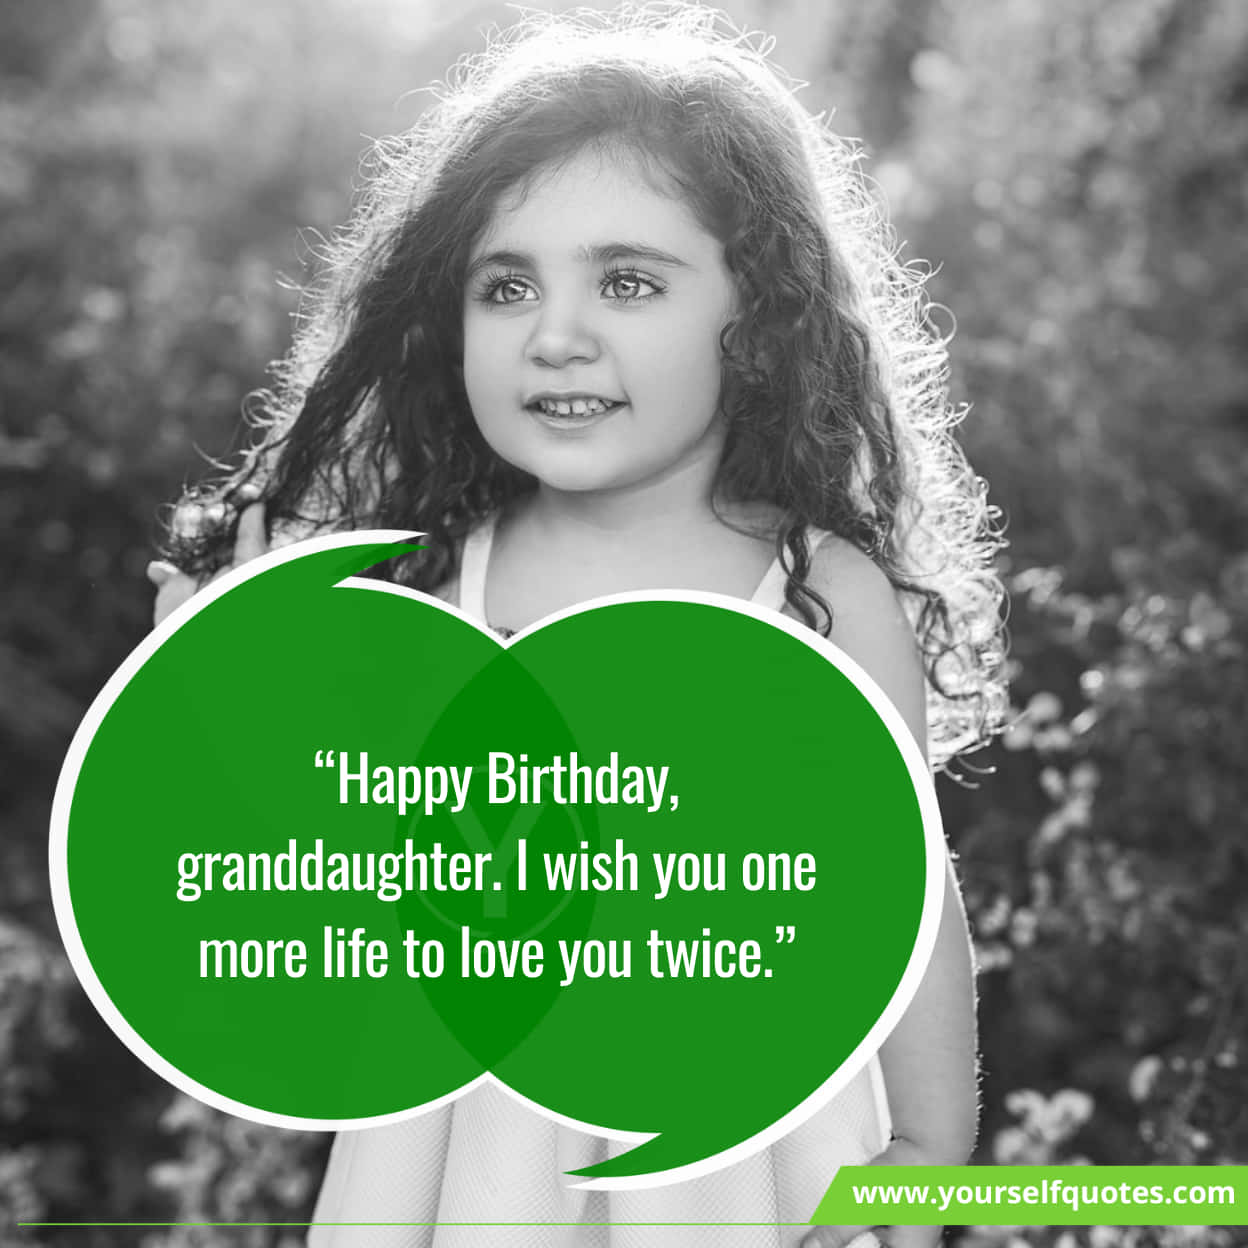 Inspiring Wishes For Happy Birthday Granddaughter